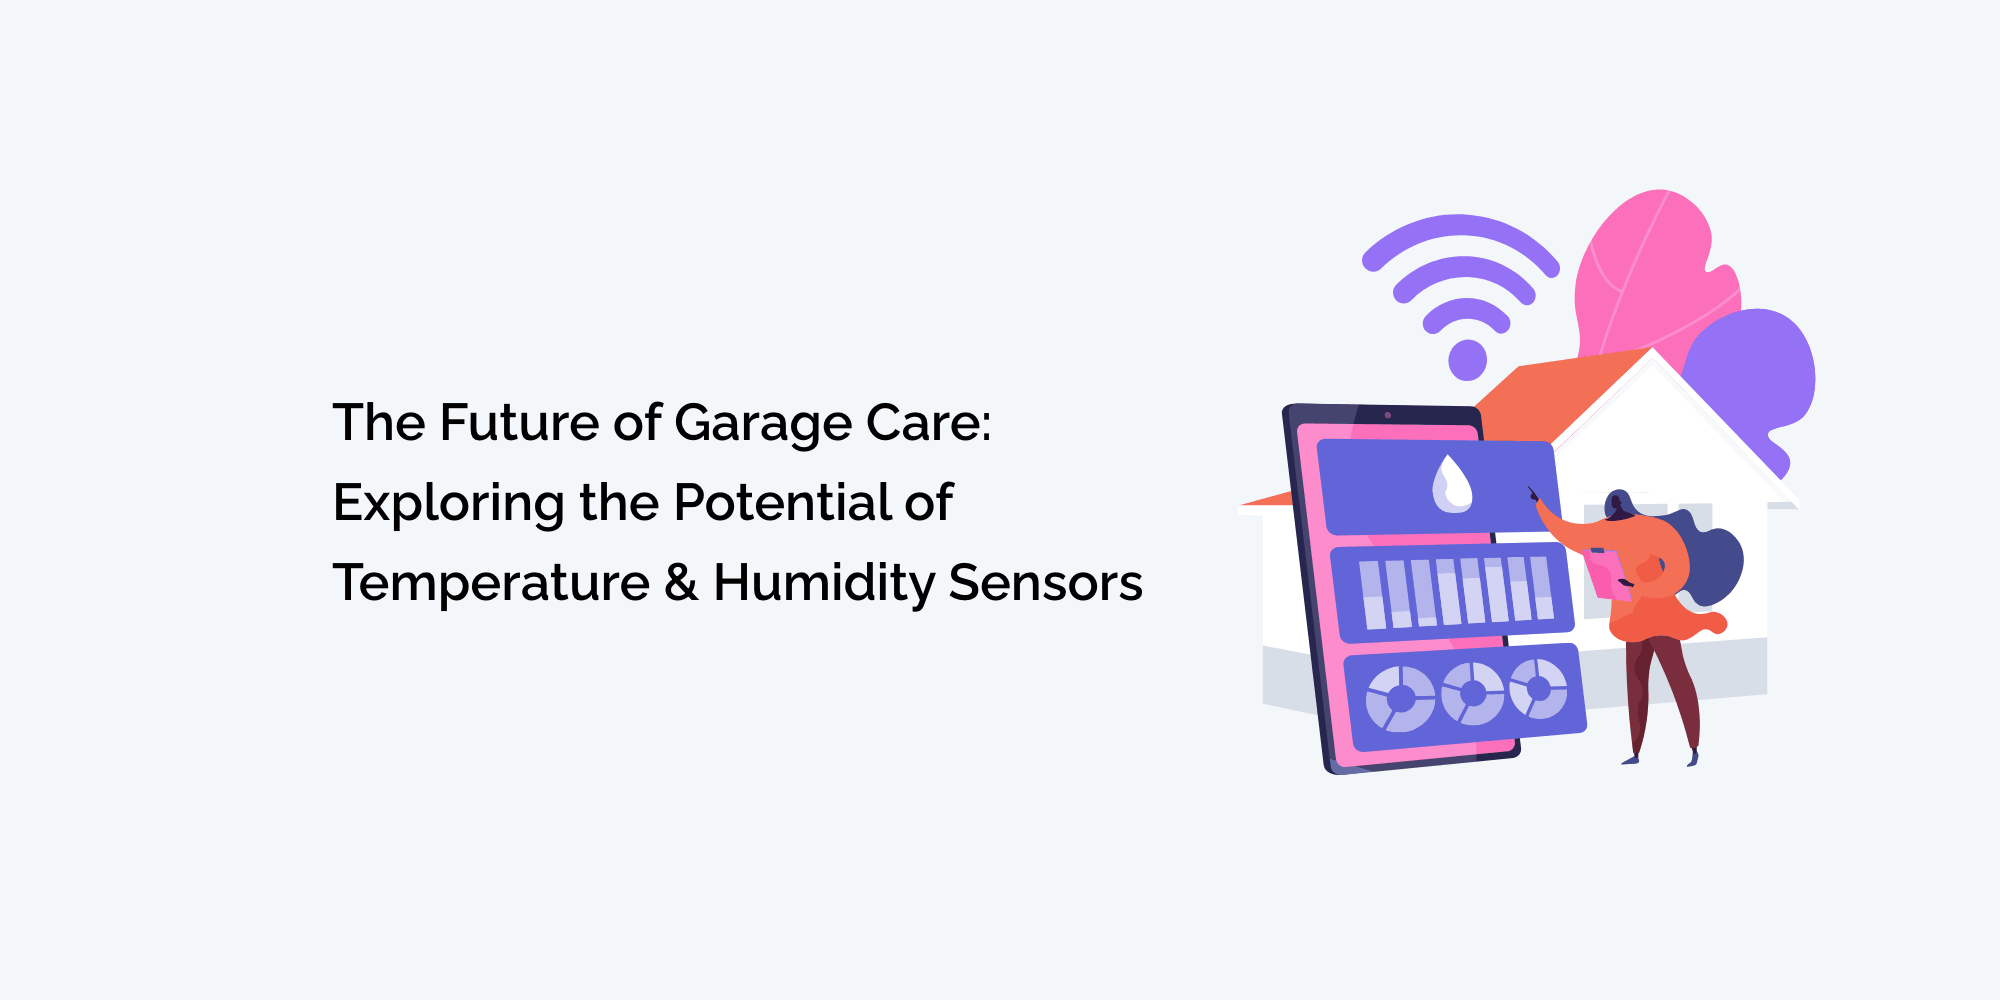 The Future of Garage Care: Exploring the Potential of Temperature and Humidity Sensors